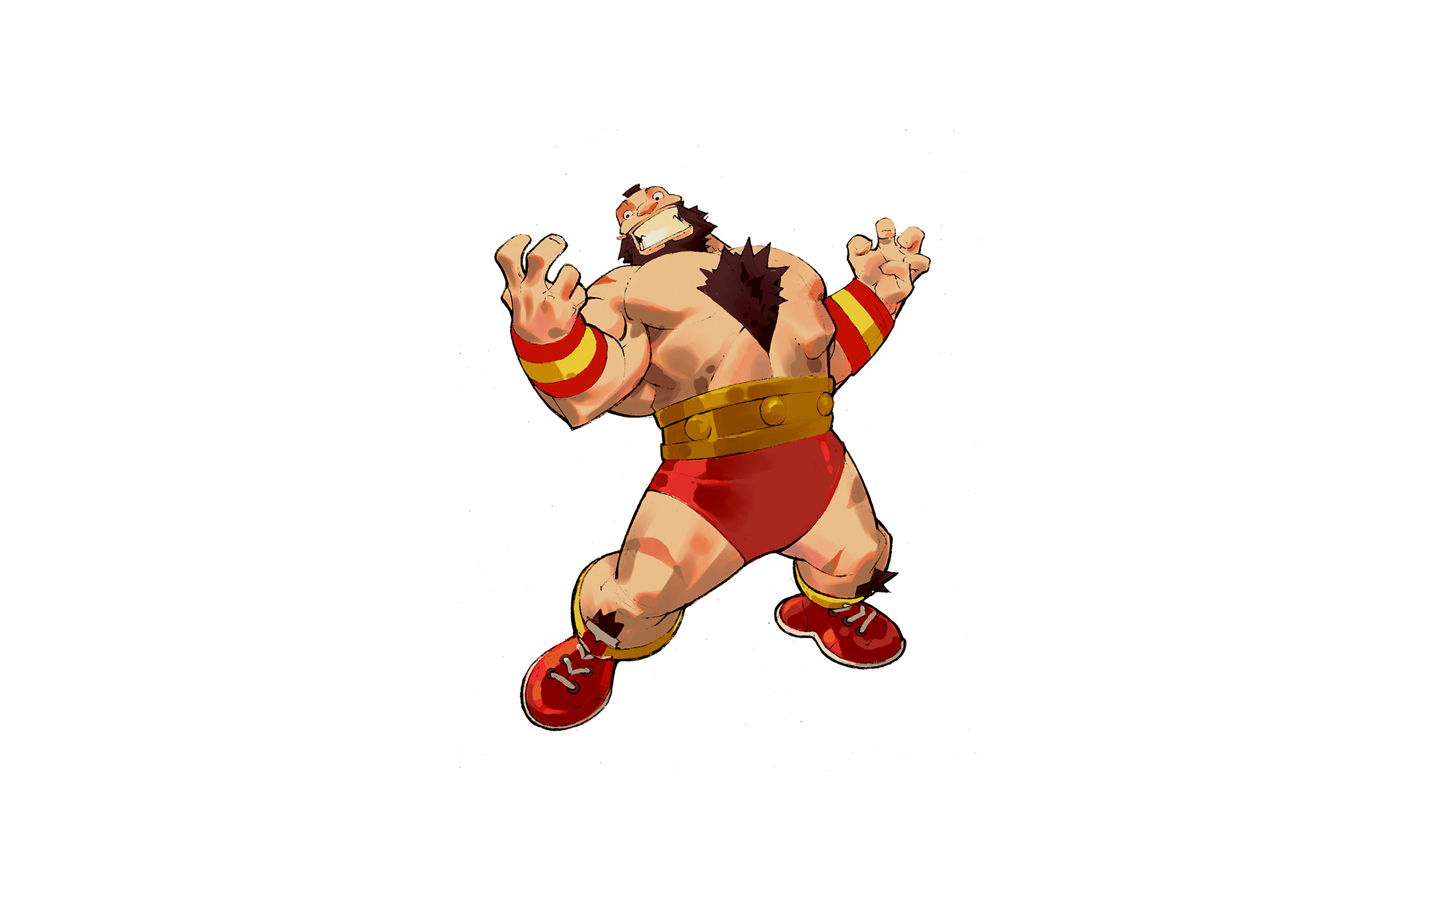 Street fighter zangief wallpaper - - High Quality and other